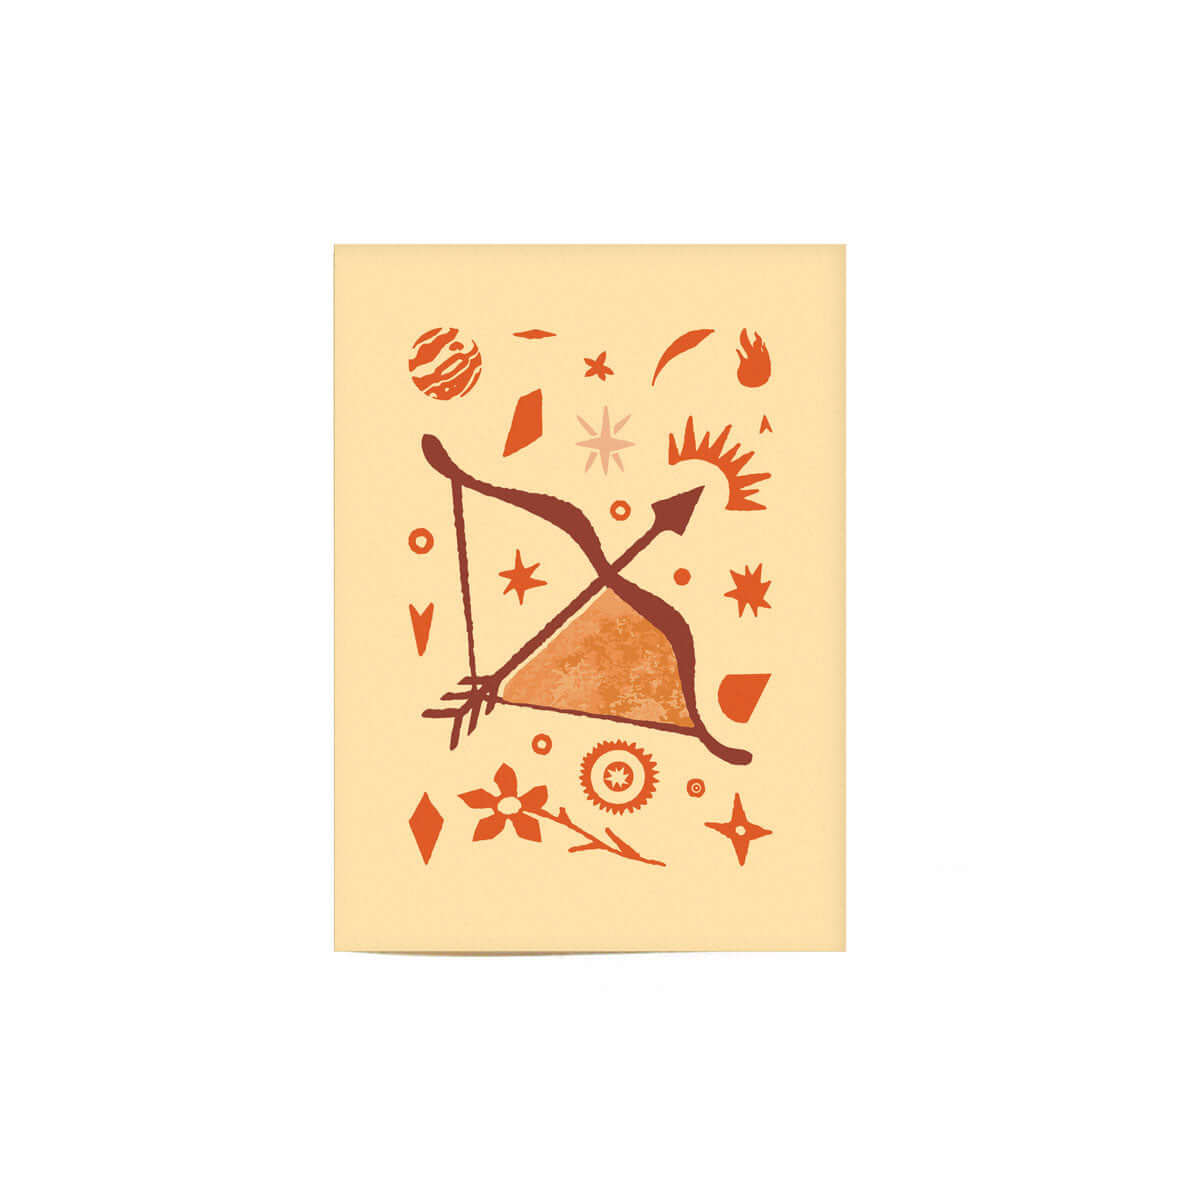 pastel yellow Sagittarius greeting card with brown and orange sagittarius themed illustrations on cover.